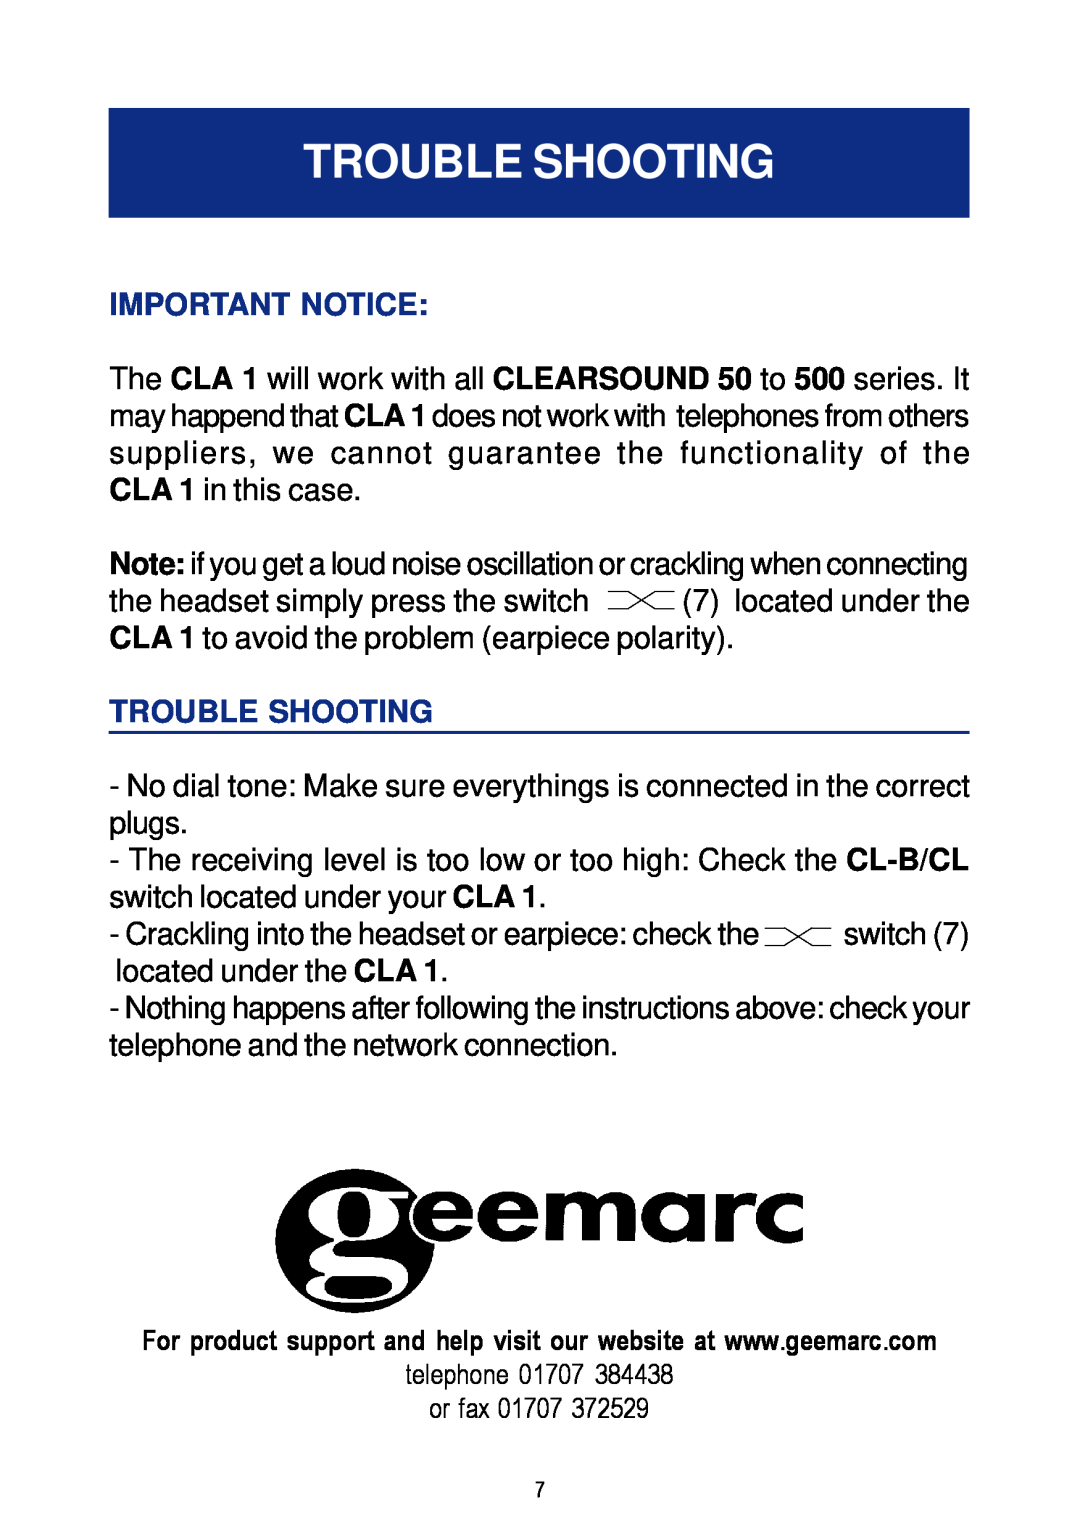 Geemarc CLA 1 manual Trouble Shooting, Important Notice 